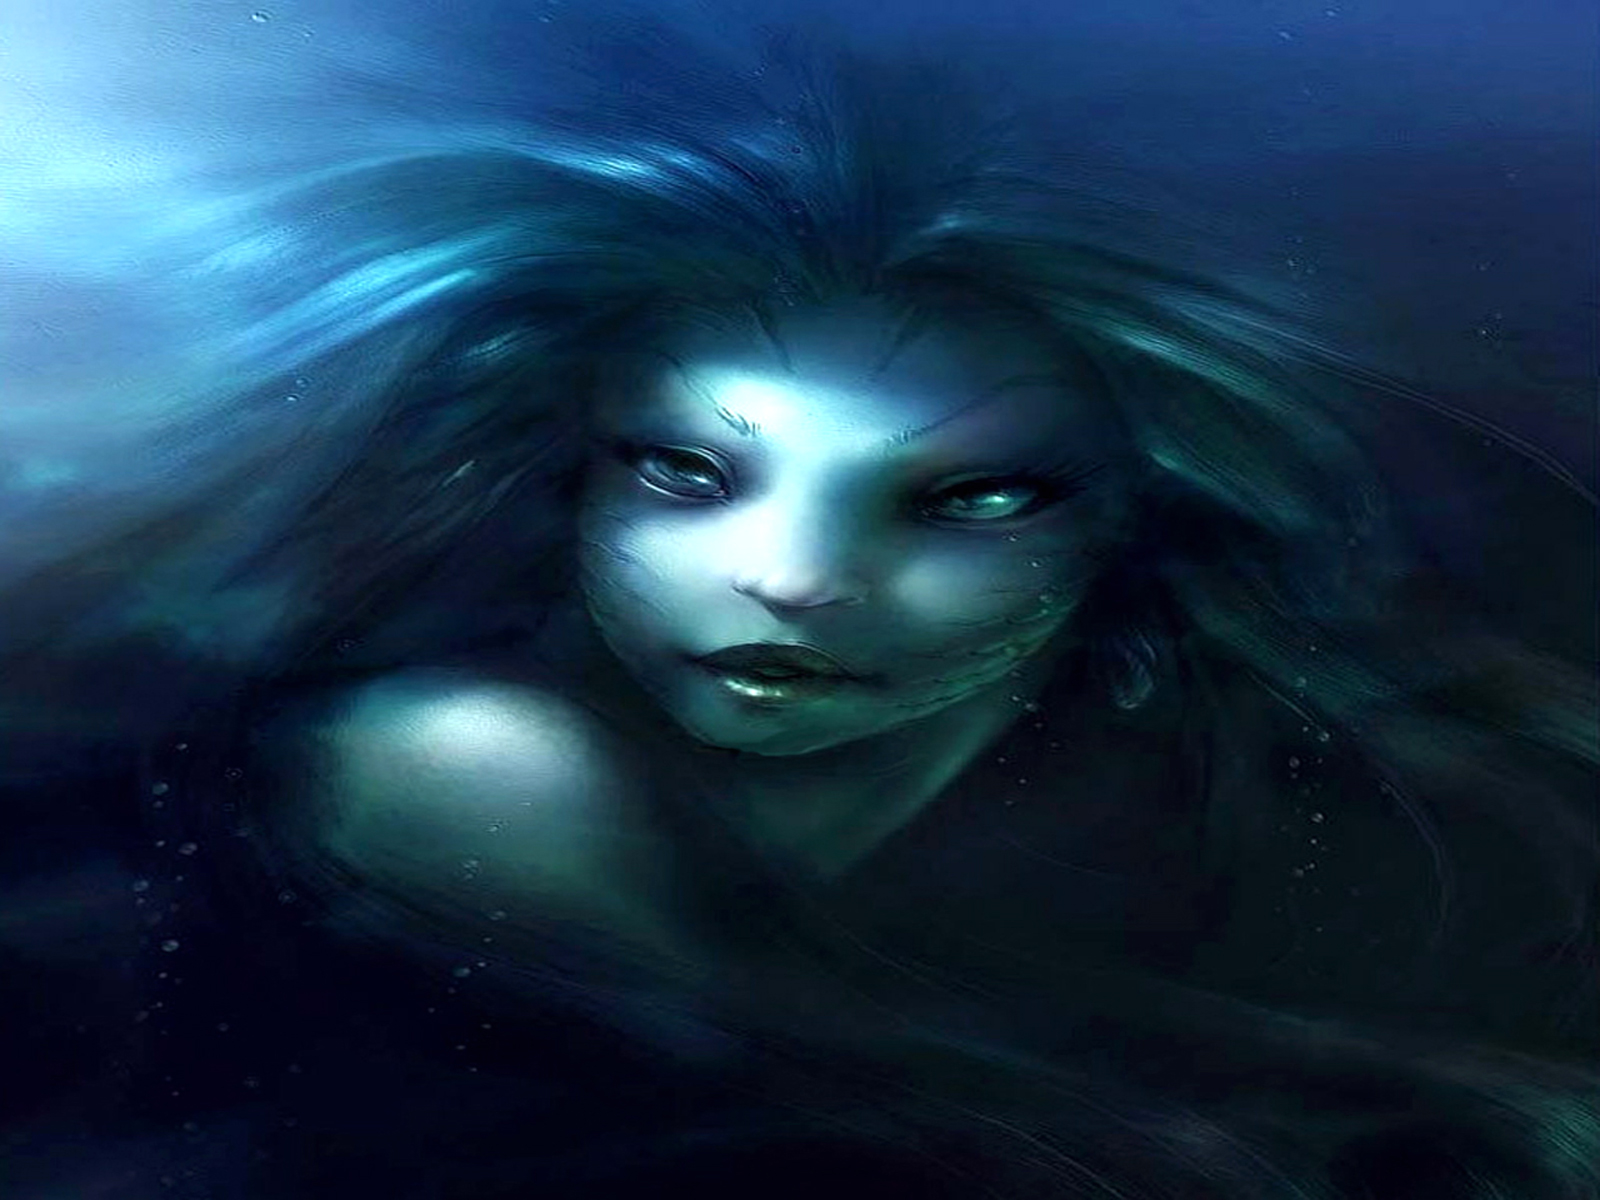 Fantasy mermaid in a captivating scene reminiscent of Harry Potter and the Goblet of Fire.